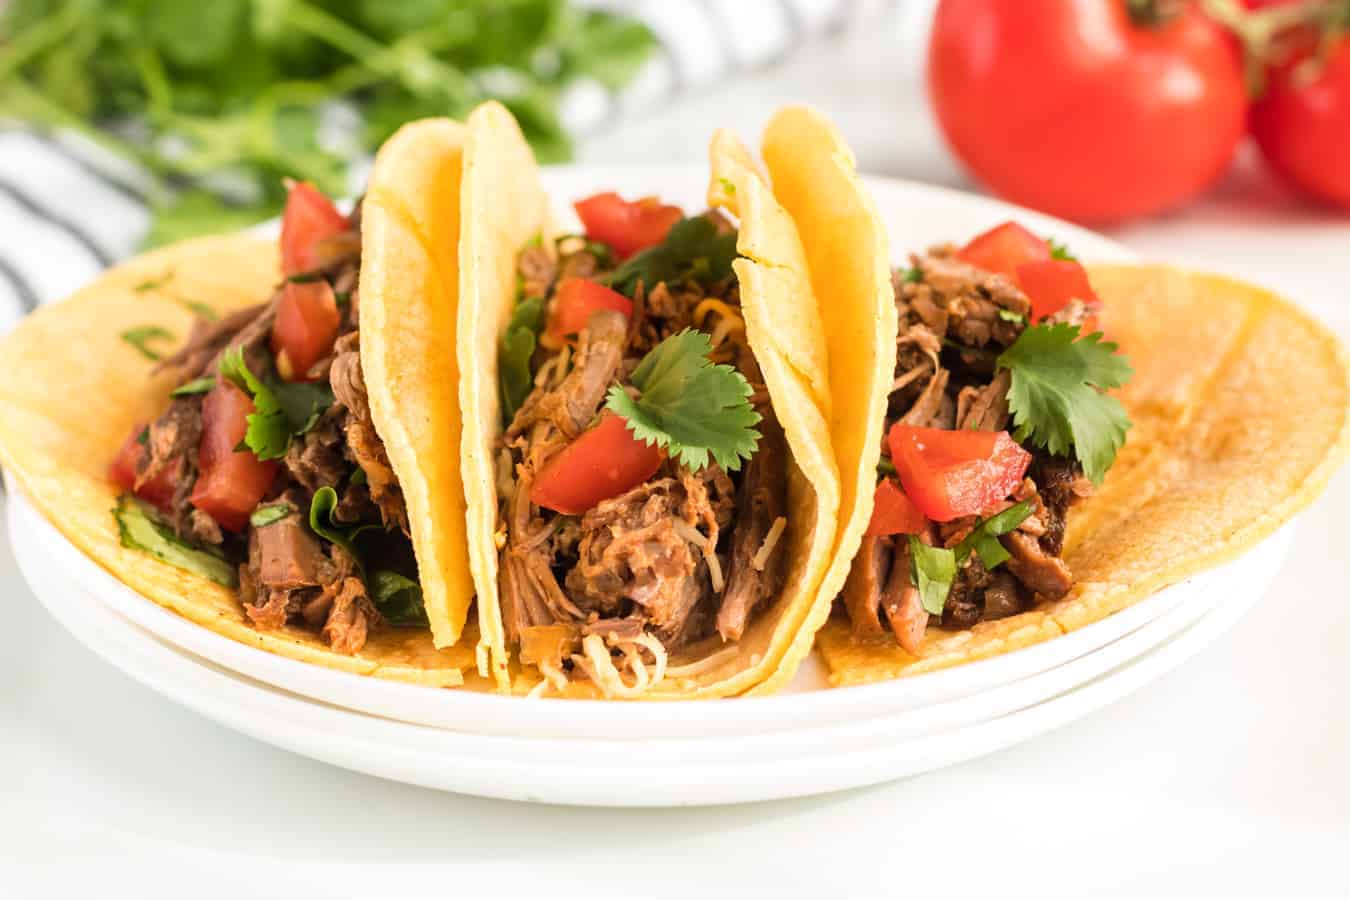 Smoky and hearty Steak Carnitas Meat in the Crock-Pot is one of the best set-it-and-forget-it meals that's exquisitely flavored and makes some tender and rich tacos.